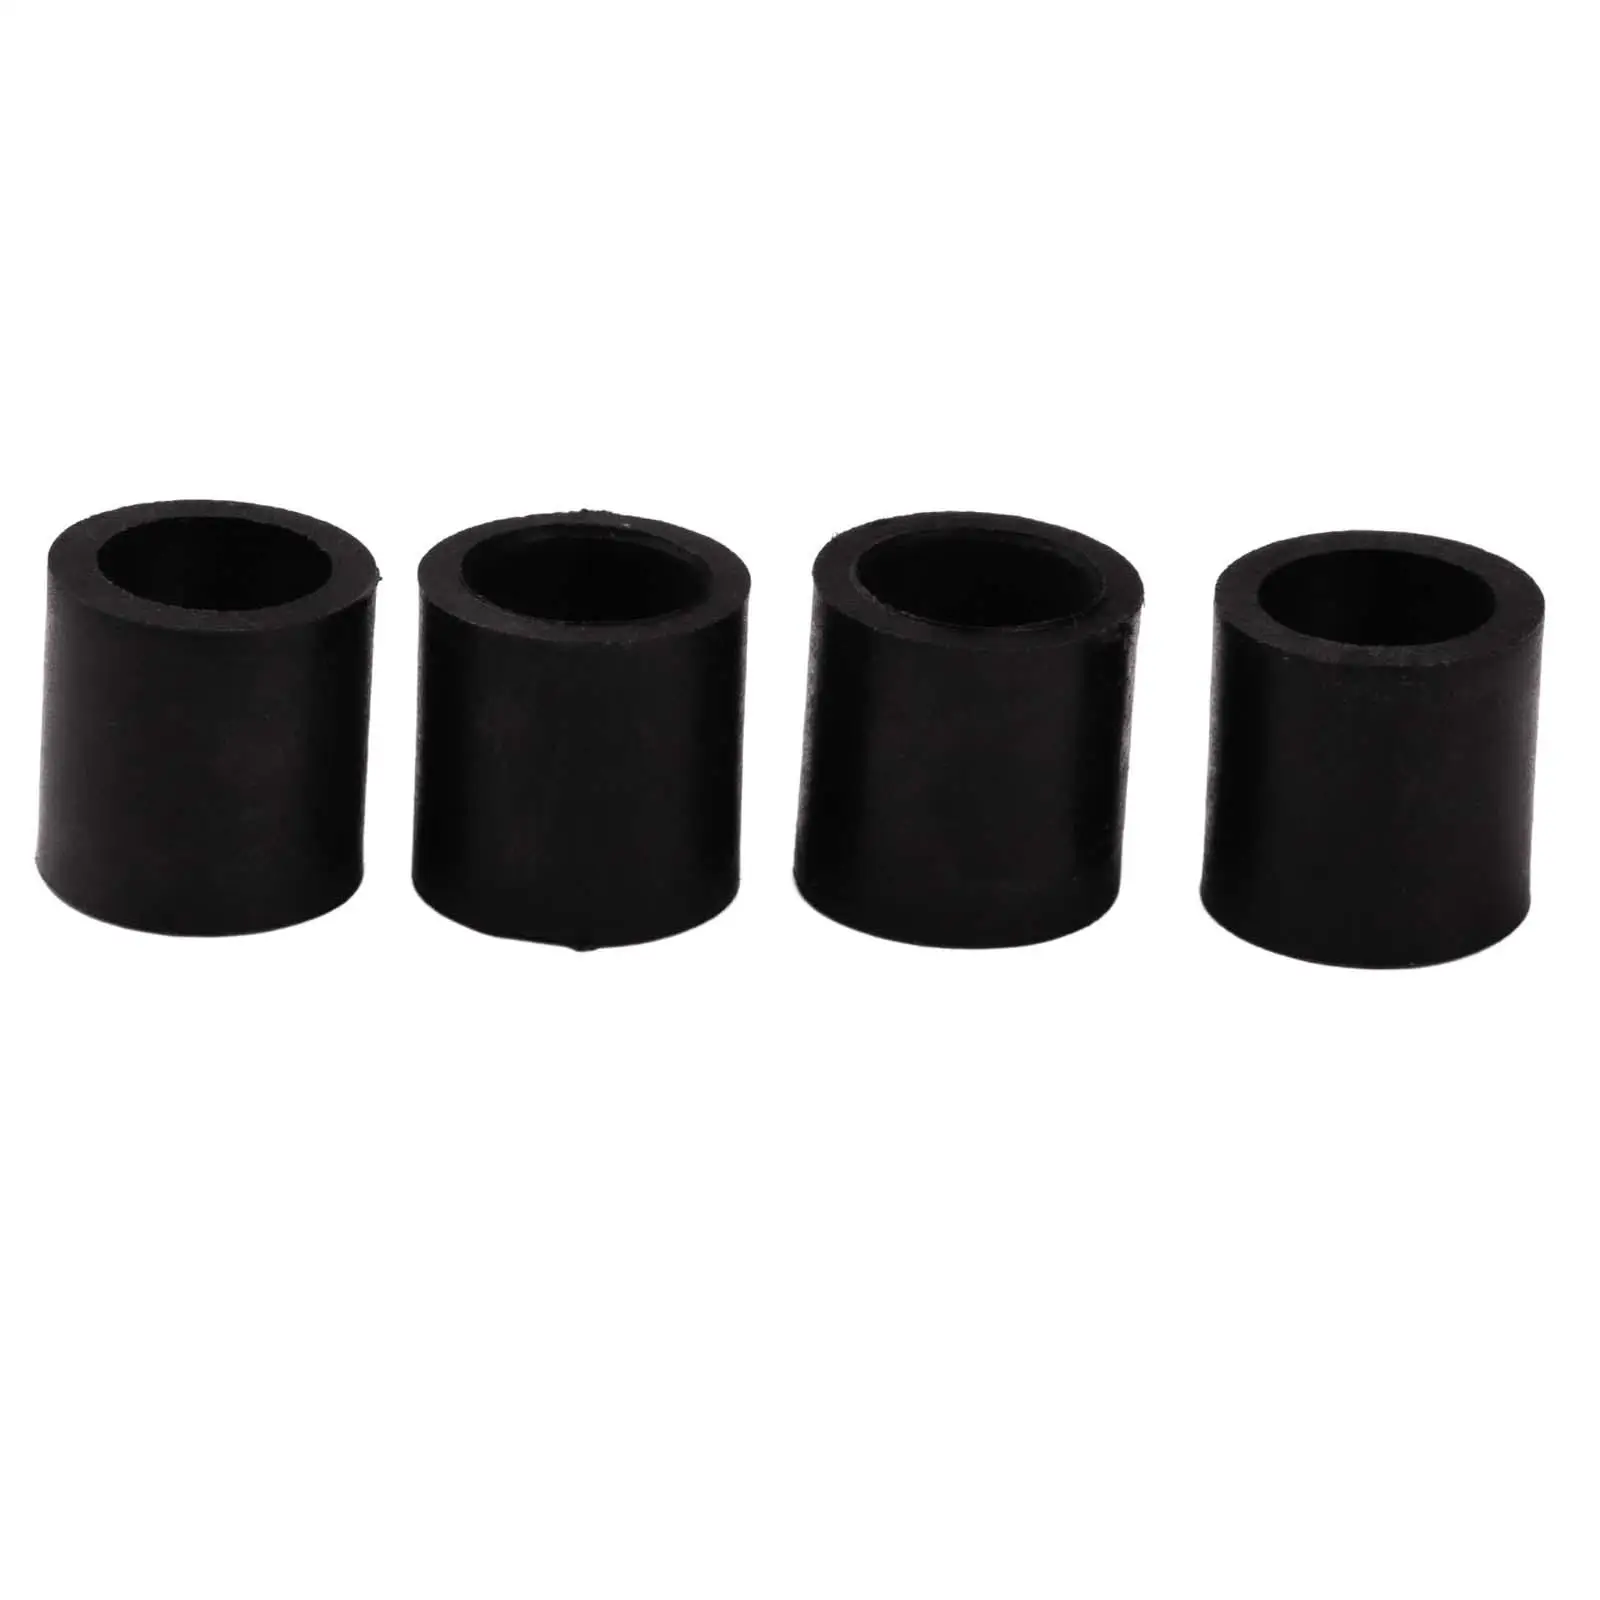 4 Pieces Replacement for Cricut Durable Rubber Rollers Accessory Parts